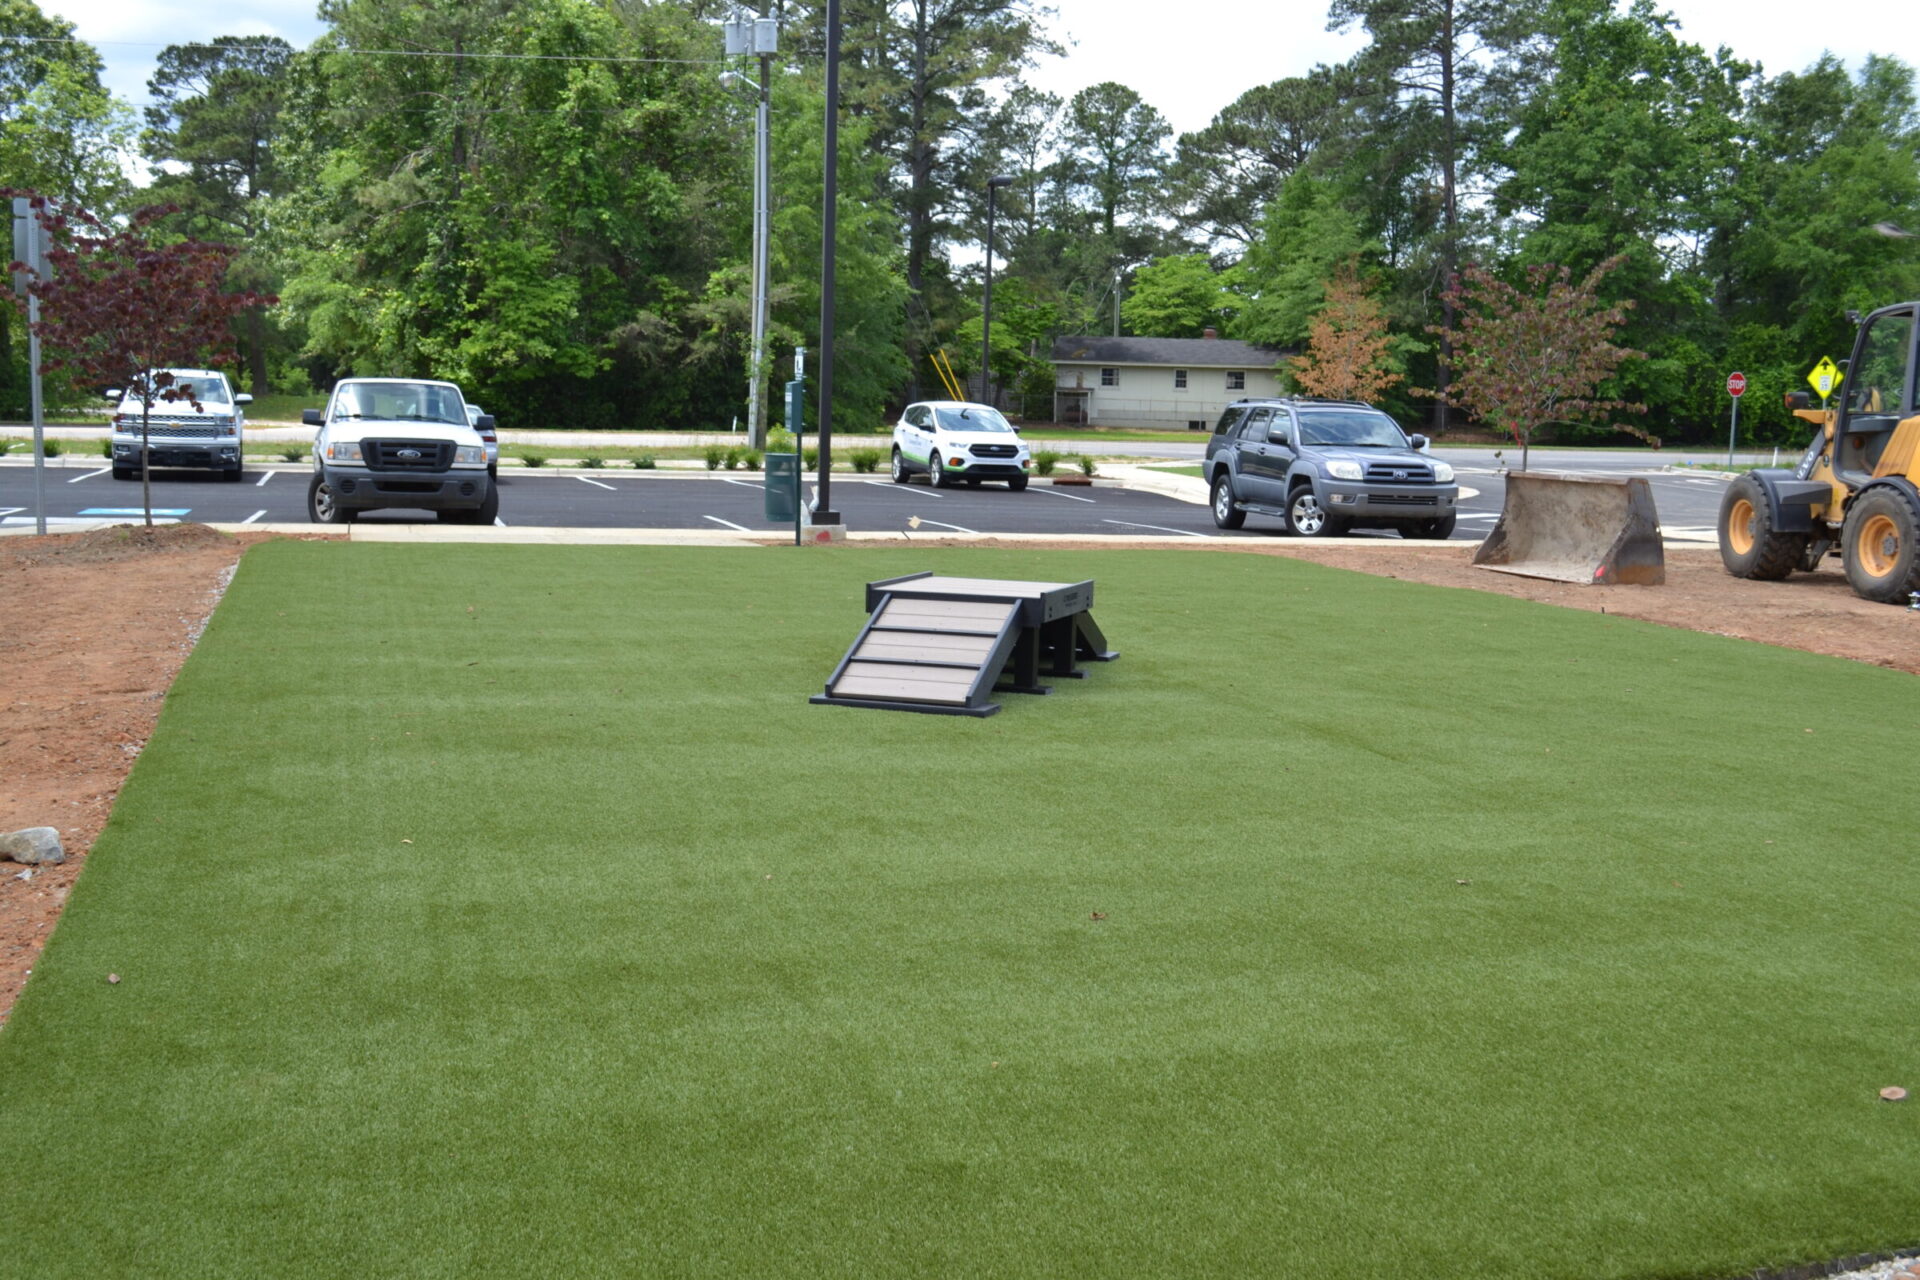 This image shows an artificial grass area with a black agility ramp for dogs, adjacent to a parking lot with vehicles and a backhoe.